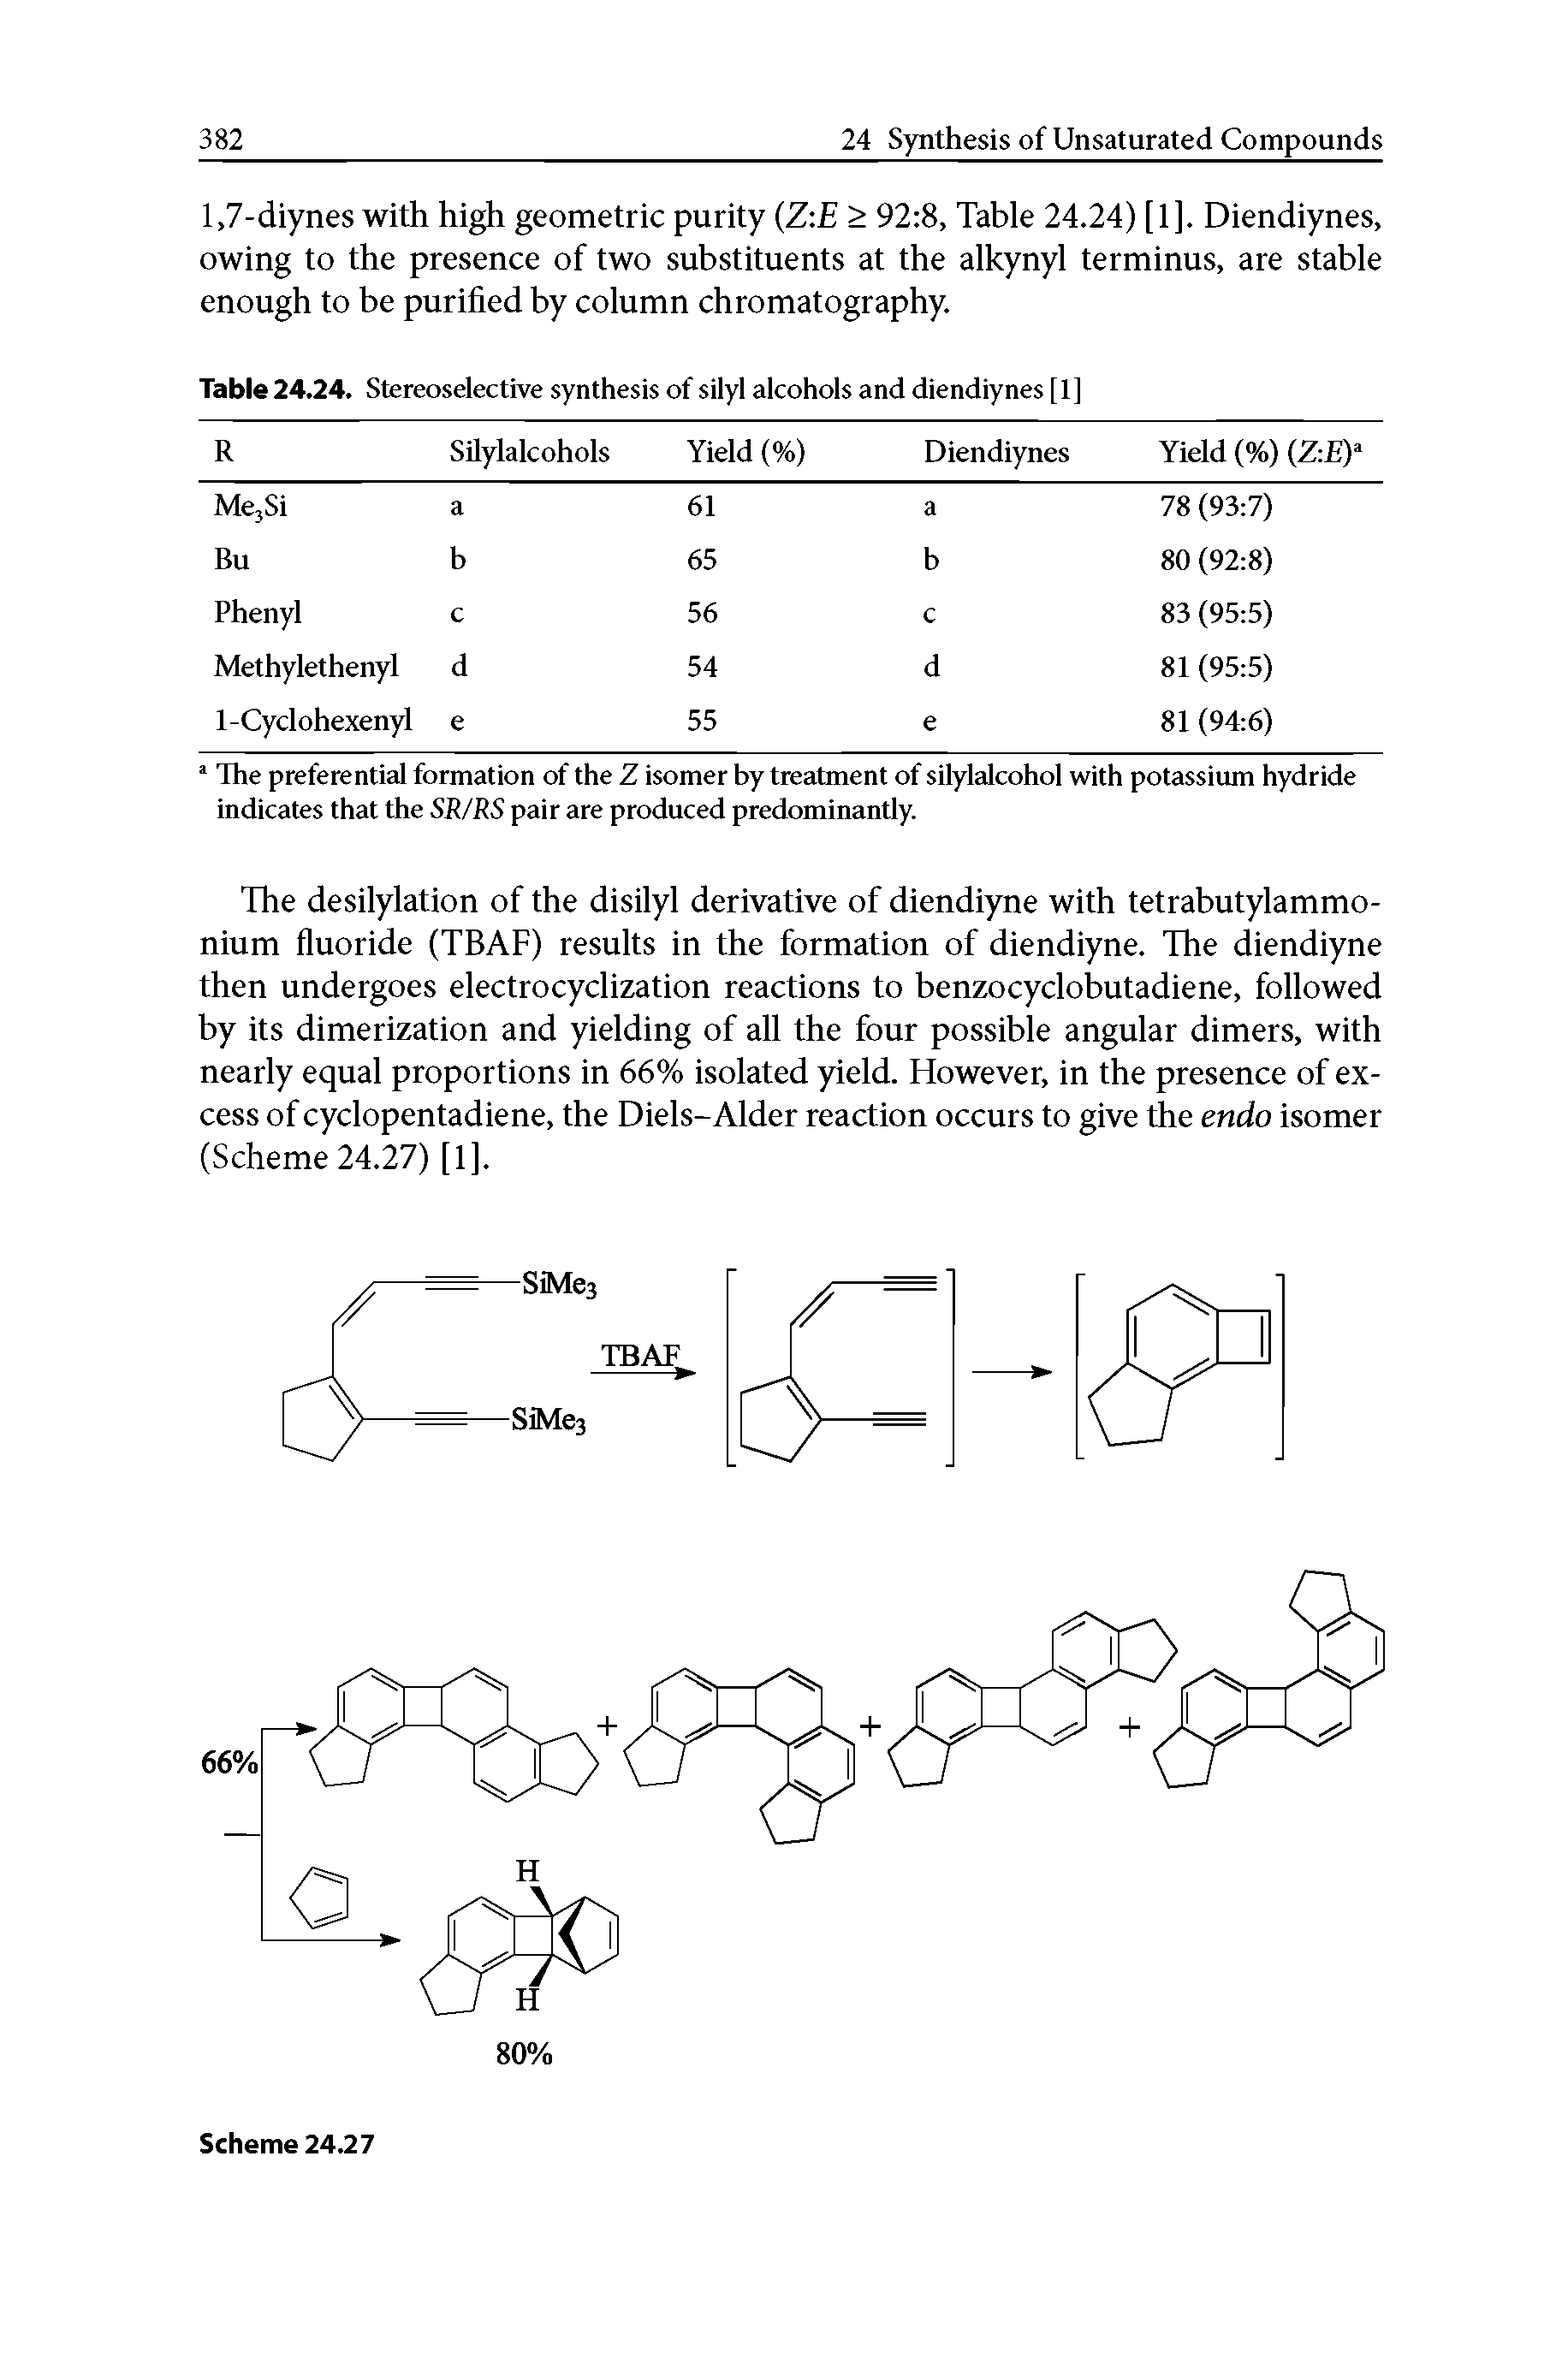 Table 24.24. Stereoselective synthesis of silyl alcohols and diendiynes [1]...